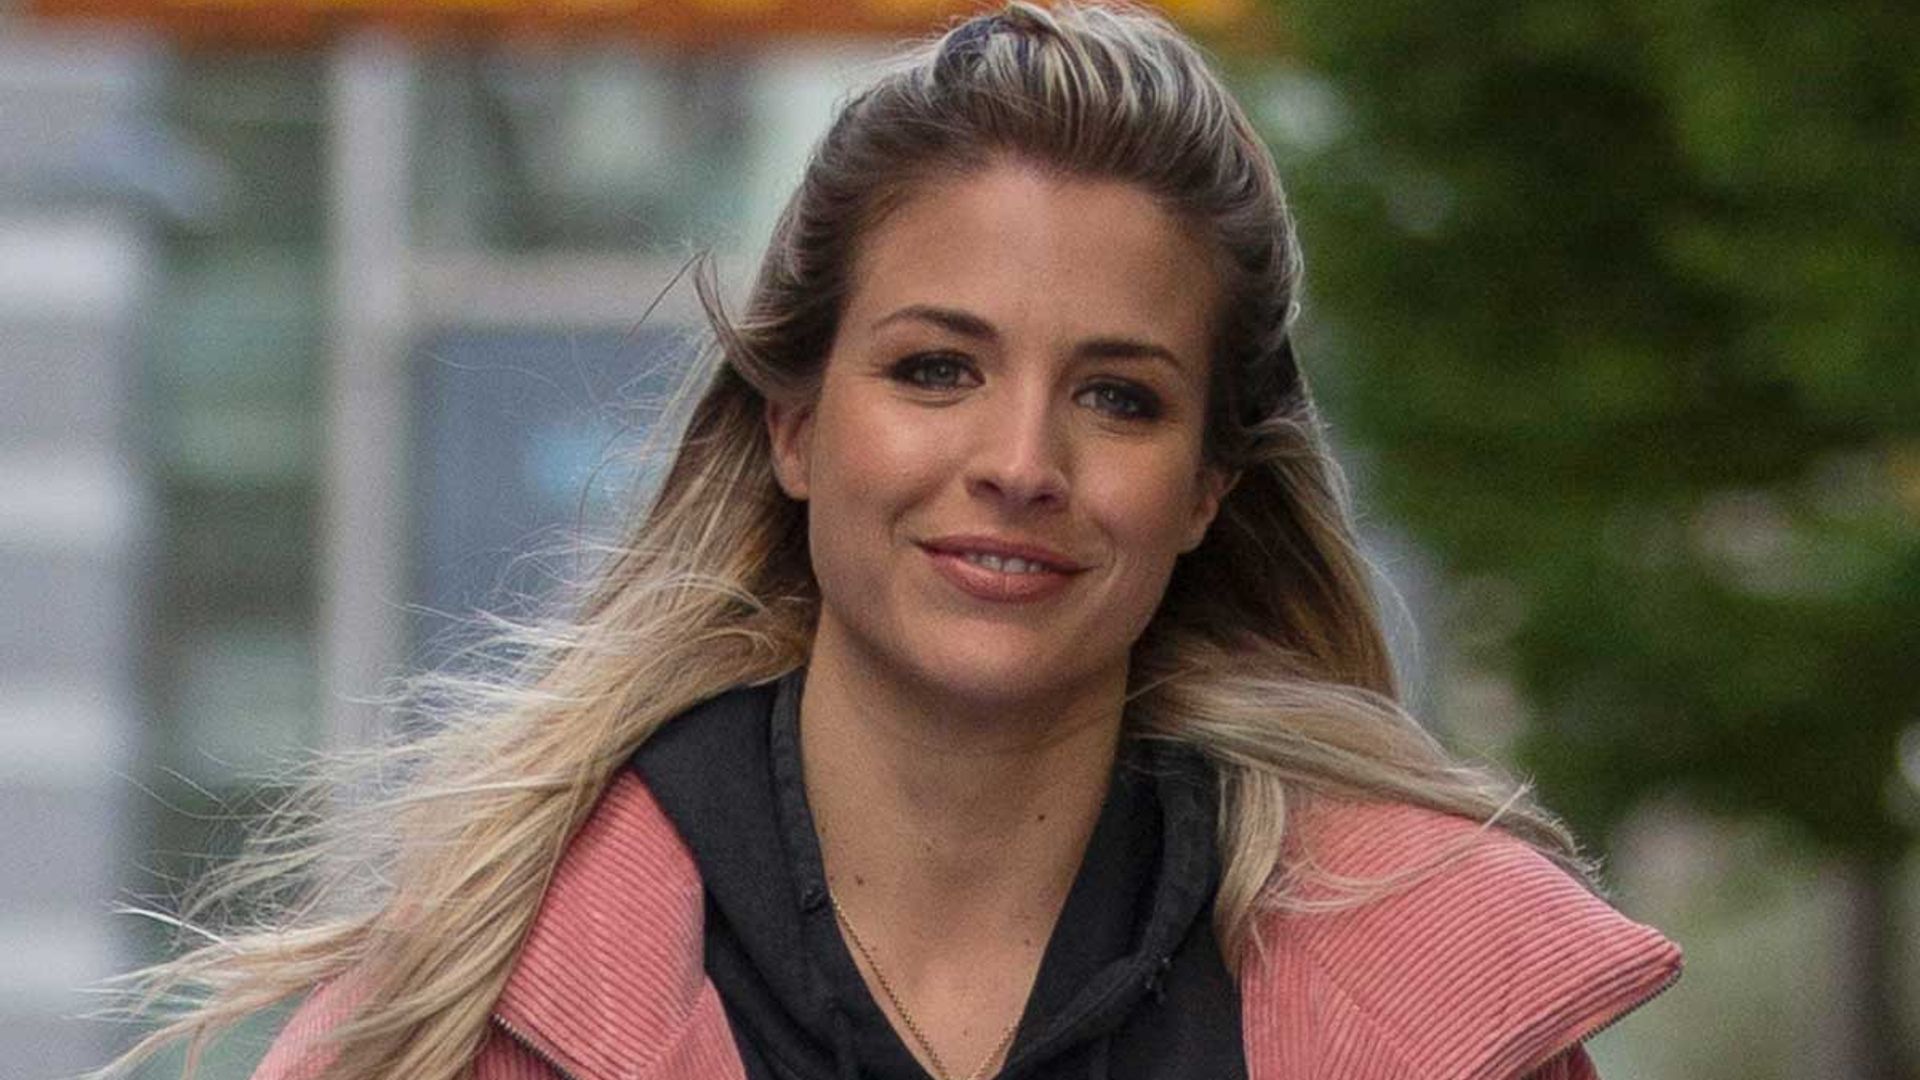 Gemma Atkinson makes brave decision for her health after losing her dad at 17